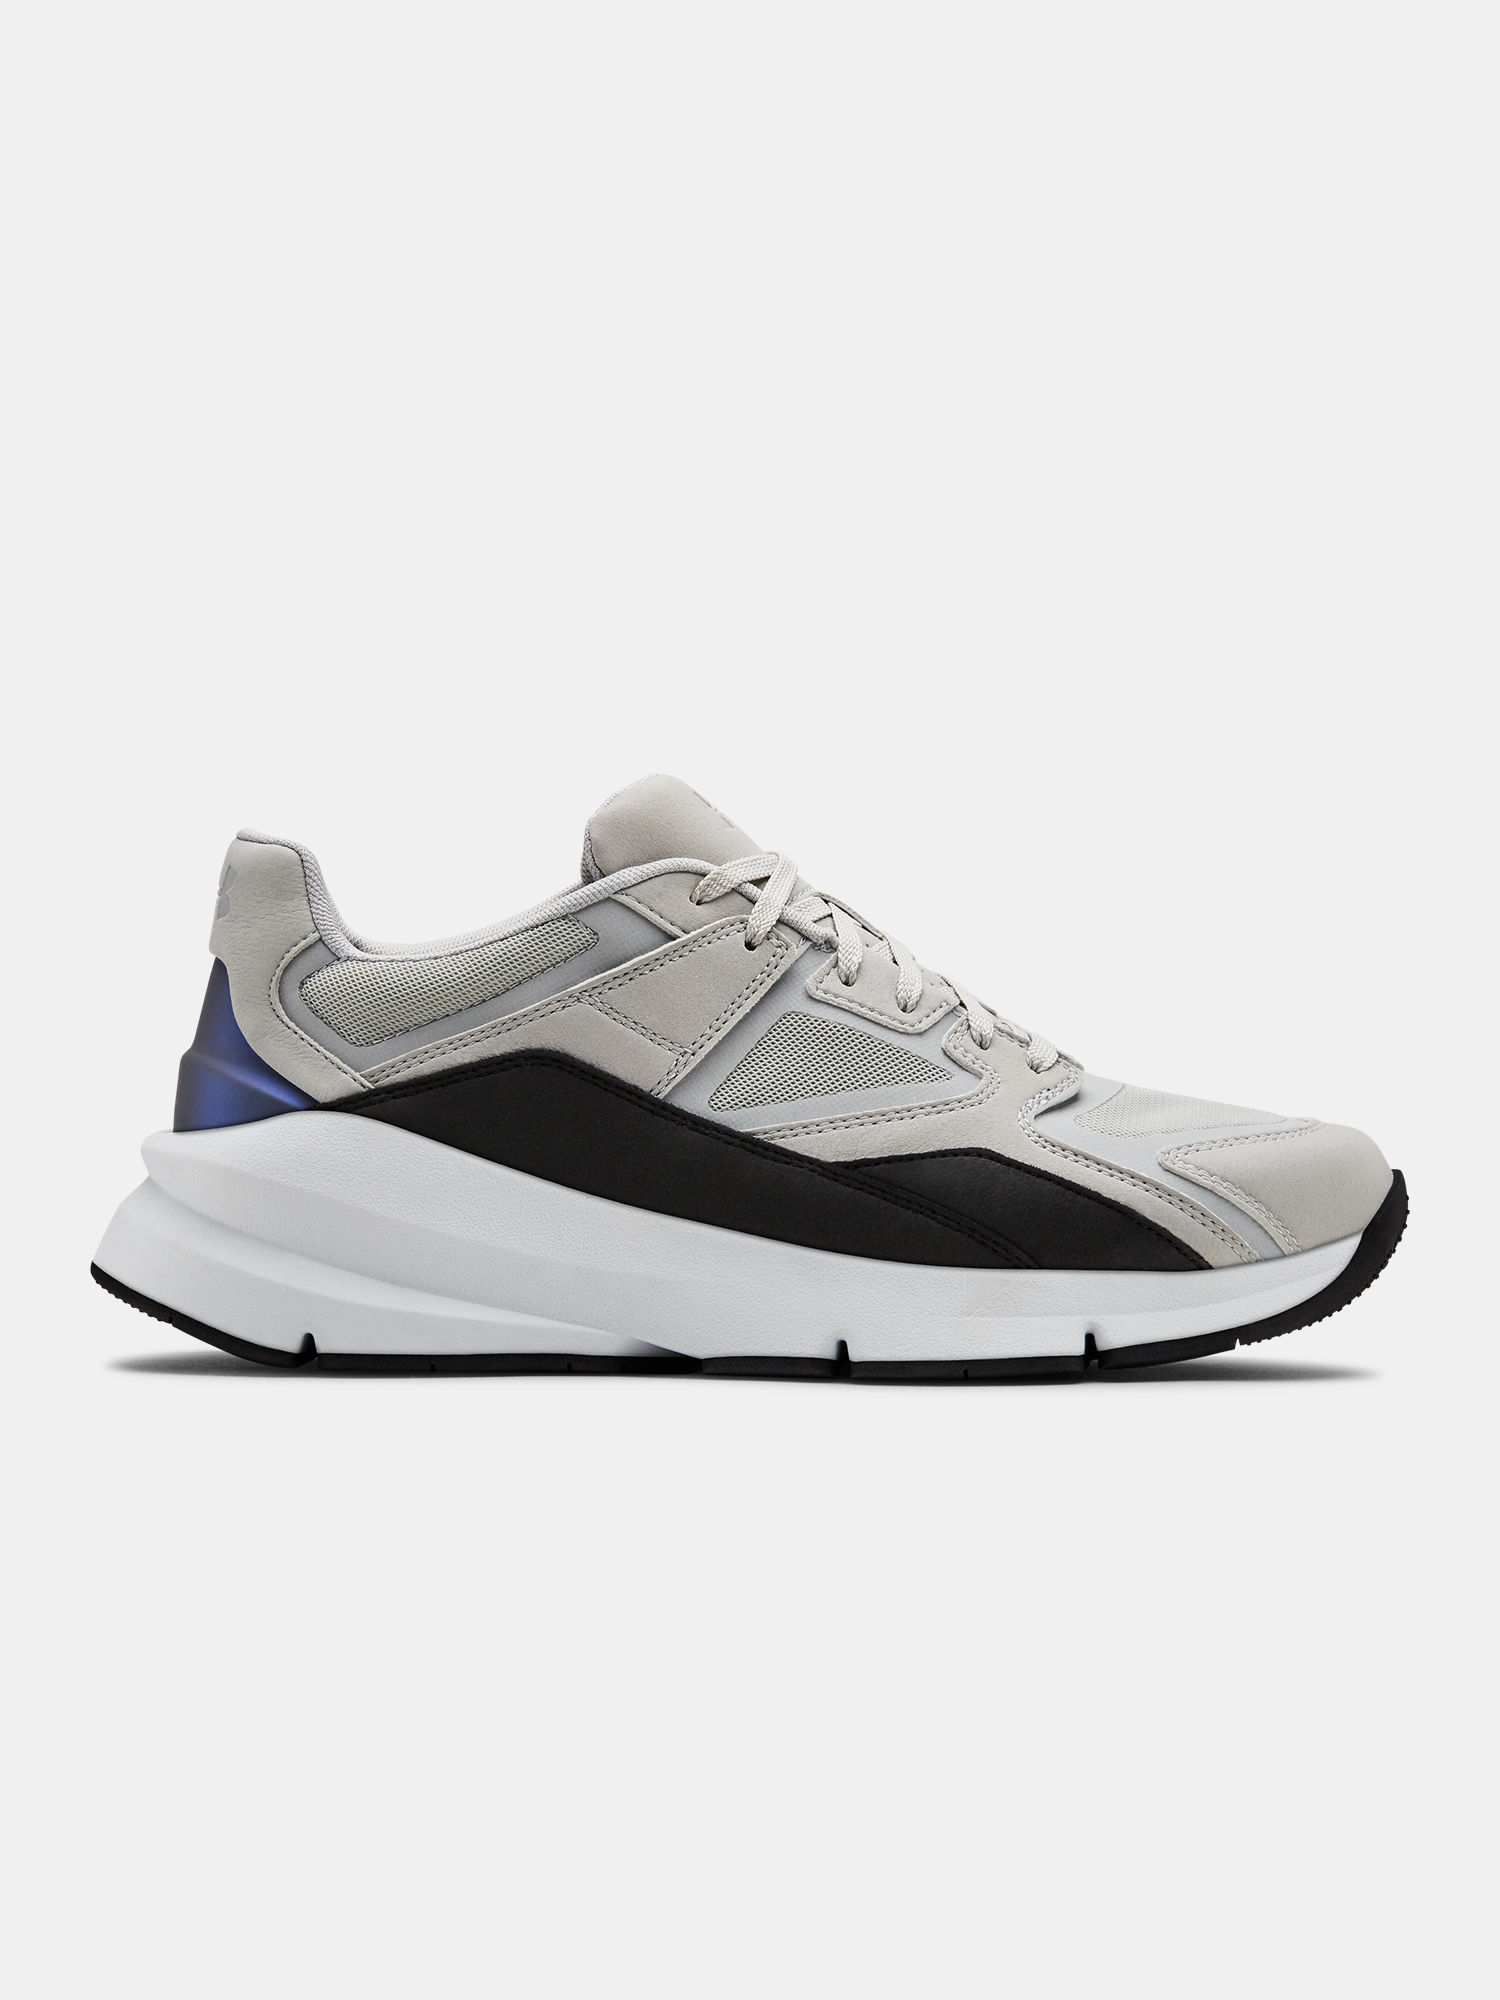 Boty Under Armour Forge 96 CLRSHFT-GRY (1)